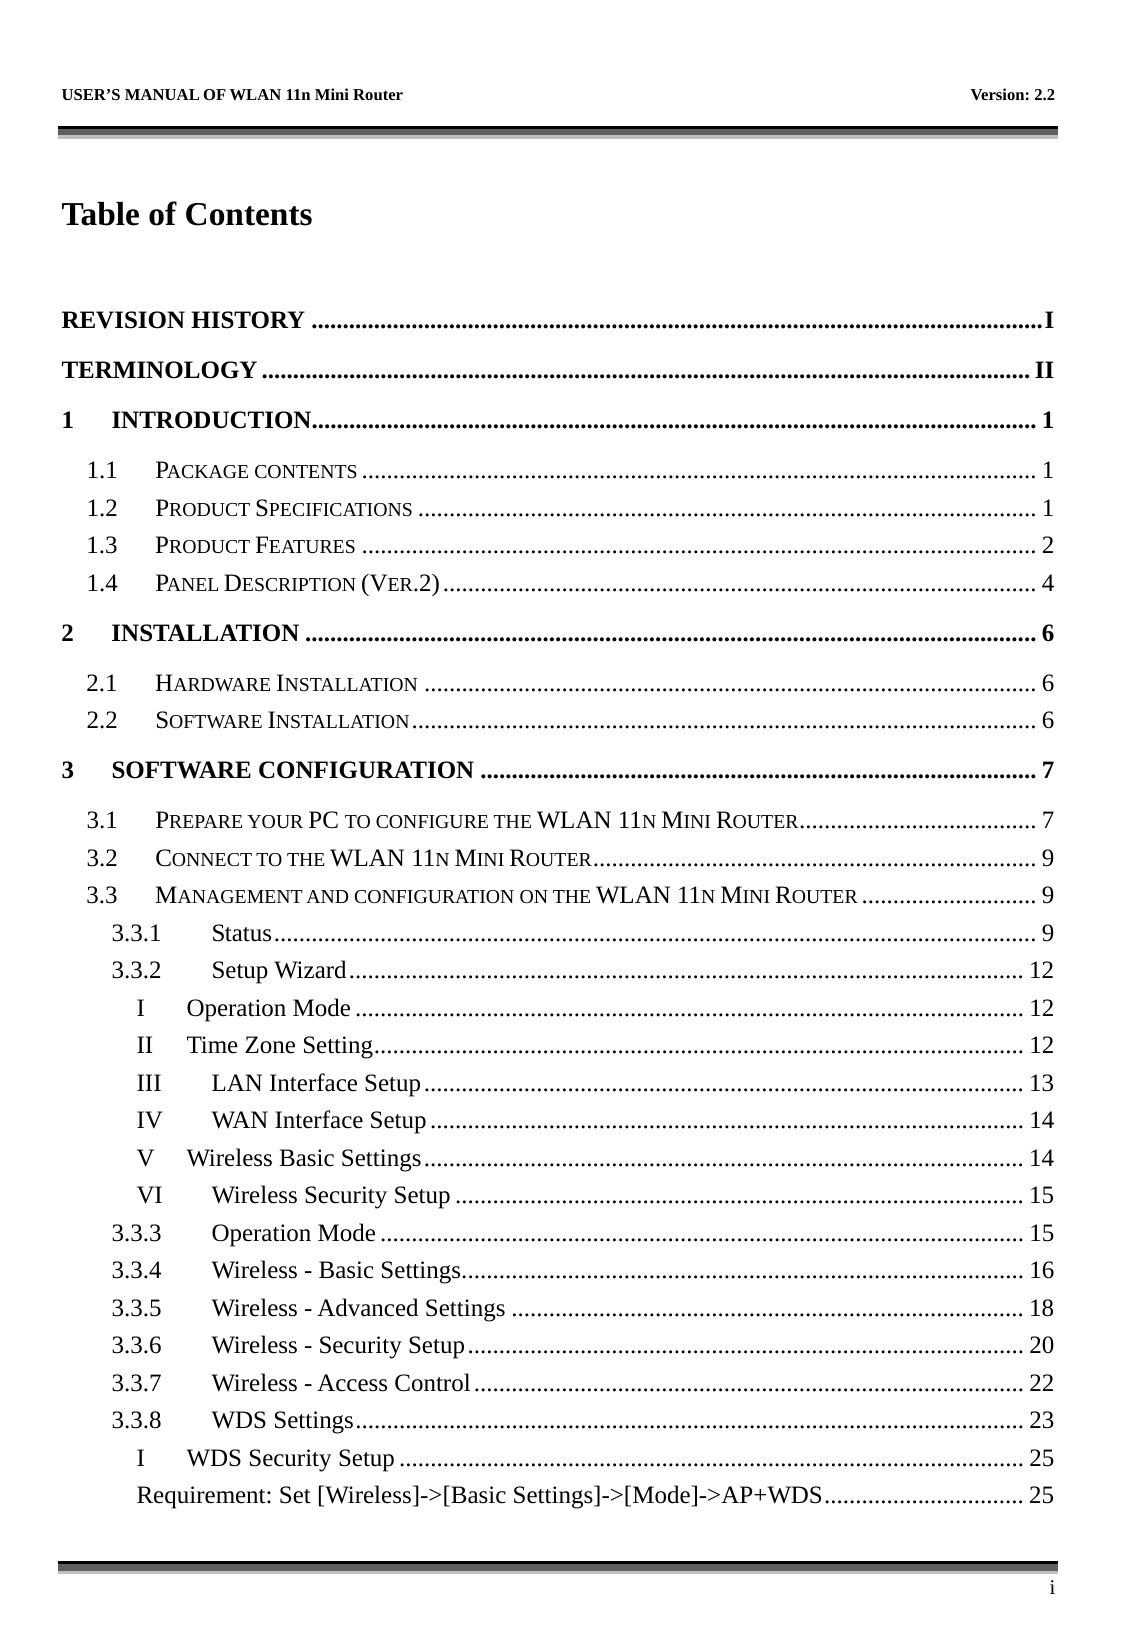   USER’S MANUAL OF WLAN 11n Mini Router    Version: 2.2      i  Table of Contents  REVISION HISTORY .....................................................................................................................I TERMINOLOGY ........................................................................................................................... II 1 INTRODUCTION....................................................................................................................1 1.1 PACKAGE CONTENTS ............................................................................................................ 1 1.2 PRODUCT SPECIFICATIONS ................................................................................................... 1 1.3 PRODUCT FEATURES ............................................................................................................ 2 1.4 PANEL DESCRIPTION (VER.2)............................................................................................... 4 2 INSTALLATION ..................................................................................................................... 6 2.1 HARDWARE INSTALLATION .................................................................................................. 6 2.2 SOFTWARE INSTALLATION.................................................................................................... 6 3 SOFTWARE CONFIGURATION ......................................................................................... 7 3.1 PREPARE YOUR PC TO CONFIGURE THE WLAN 11N MINI ROUTER...................................... 7 3.2 CONNECT TO THE WLAN 11N MINI ROUTER....................................................................... 9 3.3 MANAGEMENT AND CONFIGURATION ON THE WLAN 11N MINI ROUTER ............................ 9 3.3.1 Status..........................................................................................................................9 3.3.2 Setup Wizard............................................................................................................ 12 I Operation Mode ........................................................................................................... 12 II Time Zone Setting........................................................................................................ 12 III LAN Interface Setup................................................................................................ 13 IV WAN Interface Setup............................................................................................... 14 V Wireless Basic Settings................................................................................................ 14 VI Wireless Security Setup ........................................................................................... 15 3.3.3 Operation Mode ....................................................................................................... 15 3.3.4 Wireless - Basic Settings.......................................................................................... 16 3.3.5 Wireless - Advanced Settings .................................................................................. 18 3.3.6 Wireless - Security Setup......................................................................................... 20 3.3.7 Wireless - Access Control........................................................................................ 22 3.3.8 WDS Settings........................................................................................................... 23 I WDS Security Setup .................................................................................................... 25 Requirement: Set [Wireless]-&gt;[Basic Settings]-&gt;[Mode]-&gt;AP+WDS................................ 25 